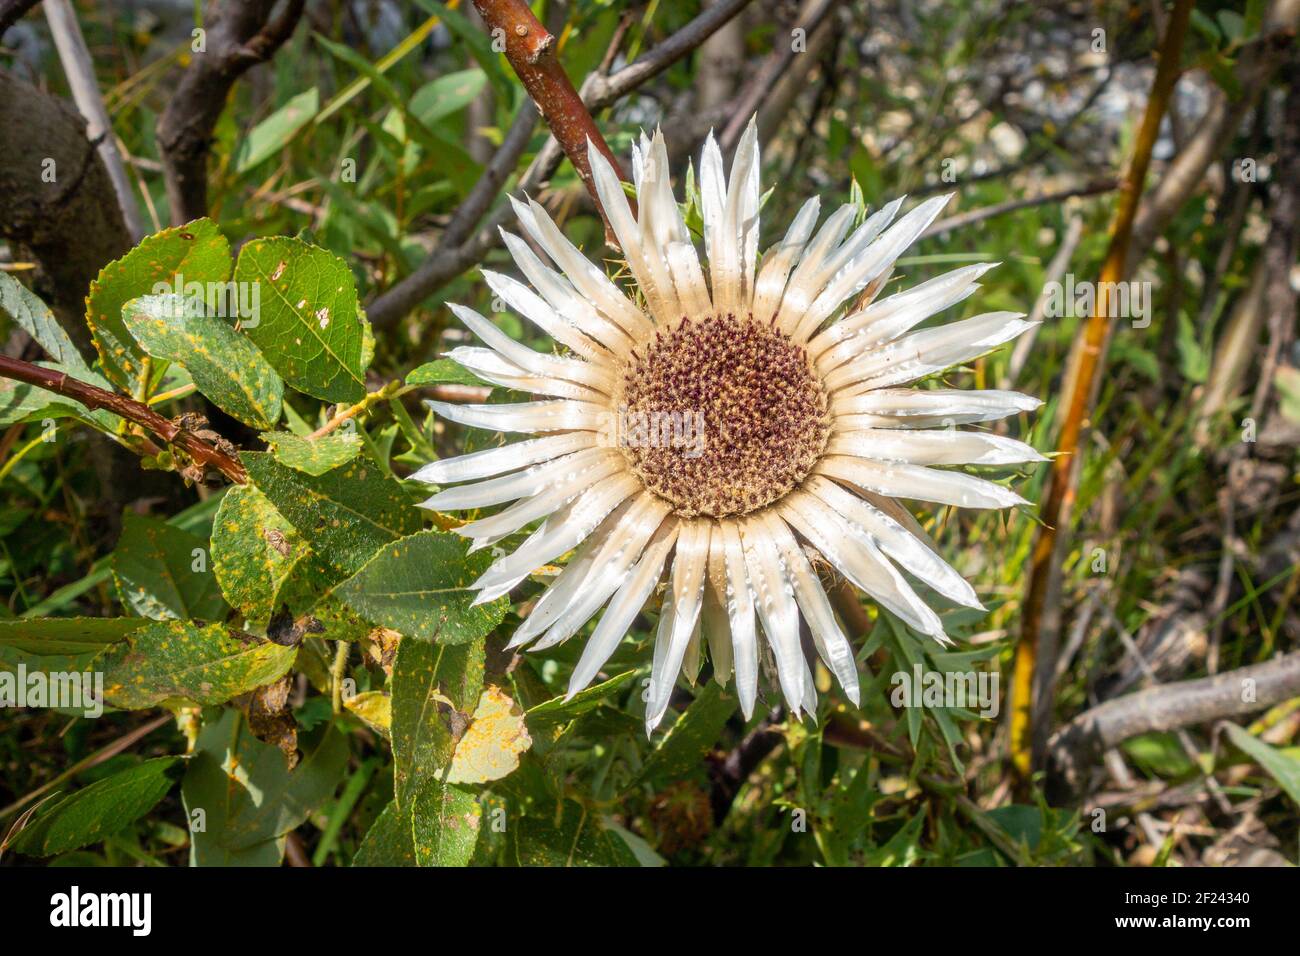 Stemless carline thistle in Vanoise national Park valley, French alps Stock Photo